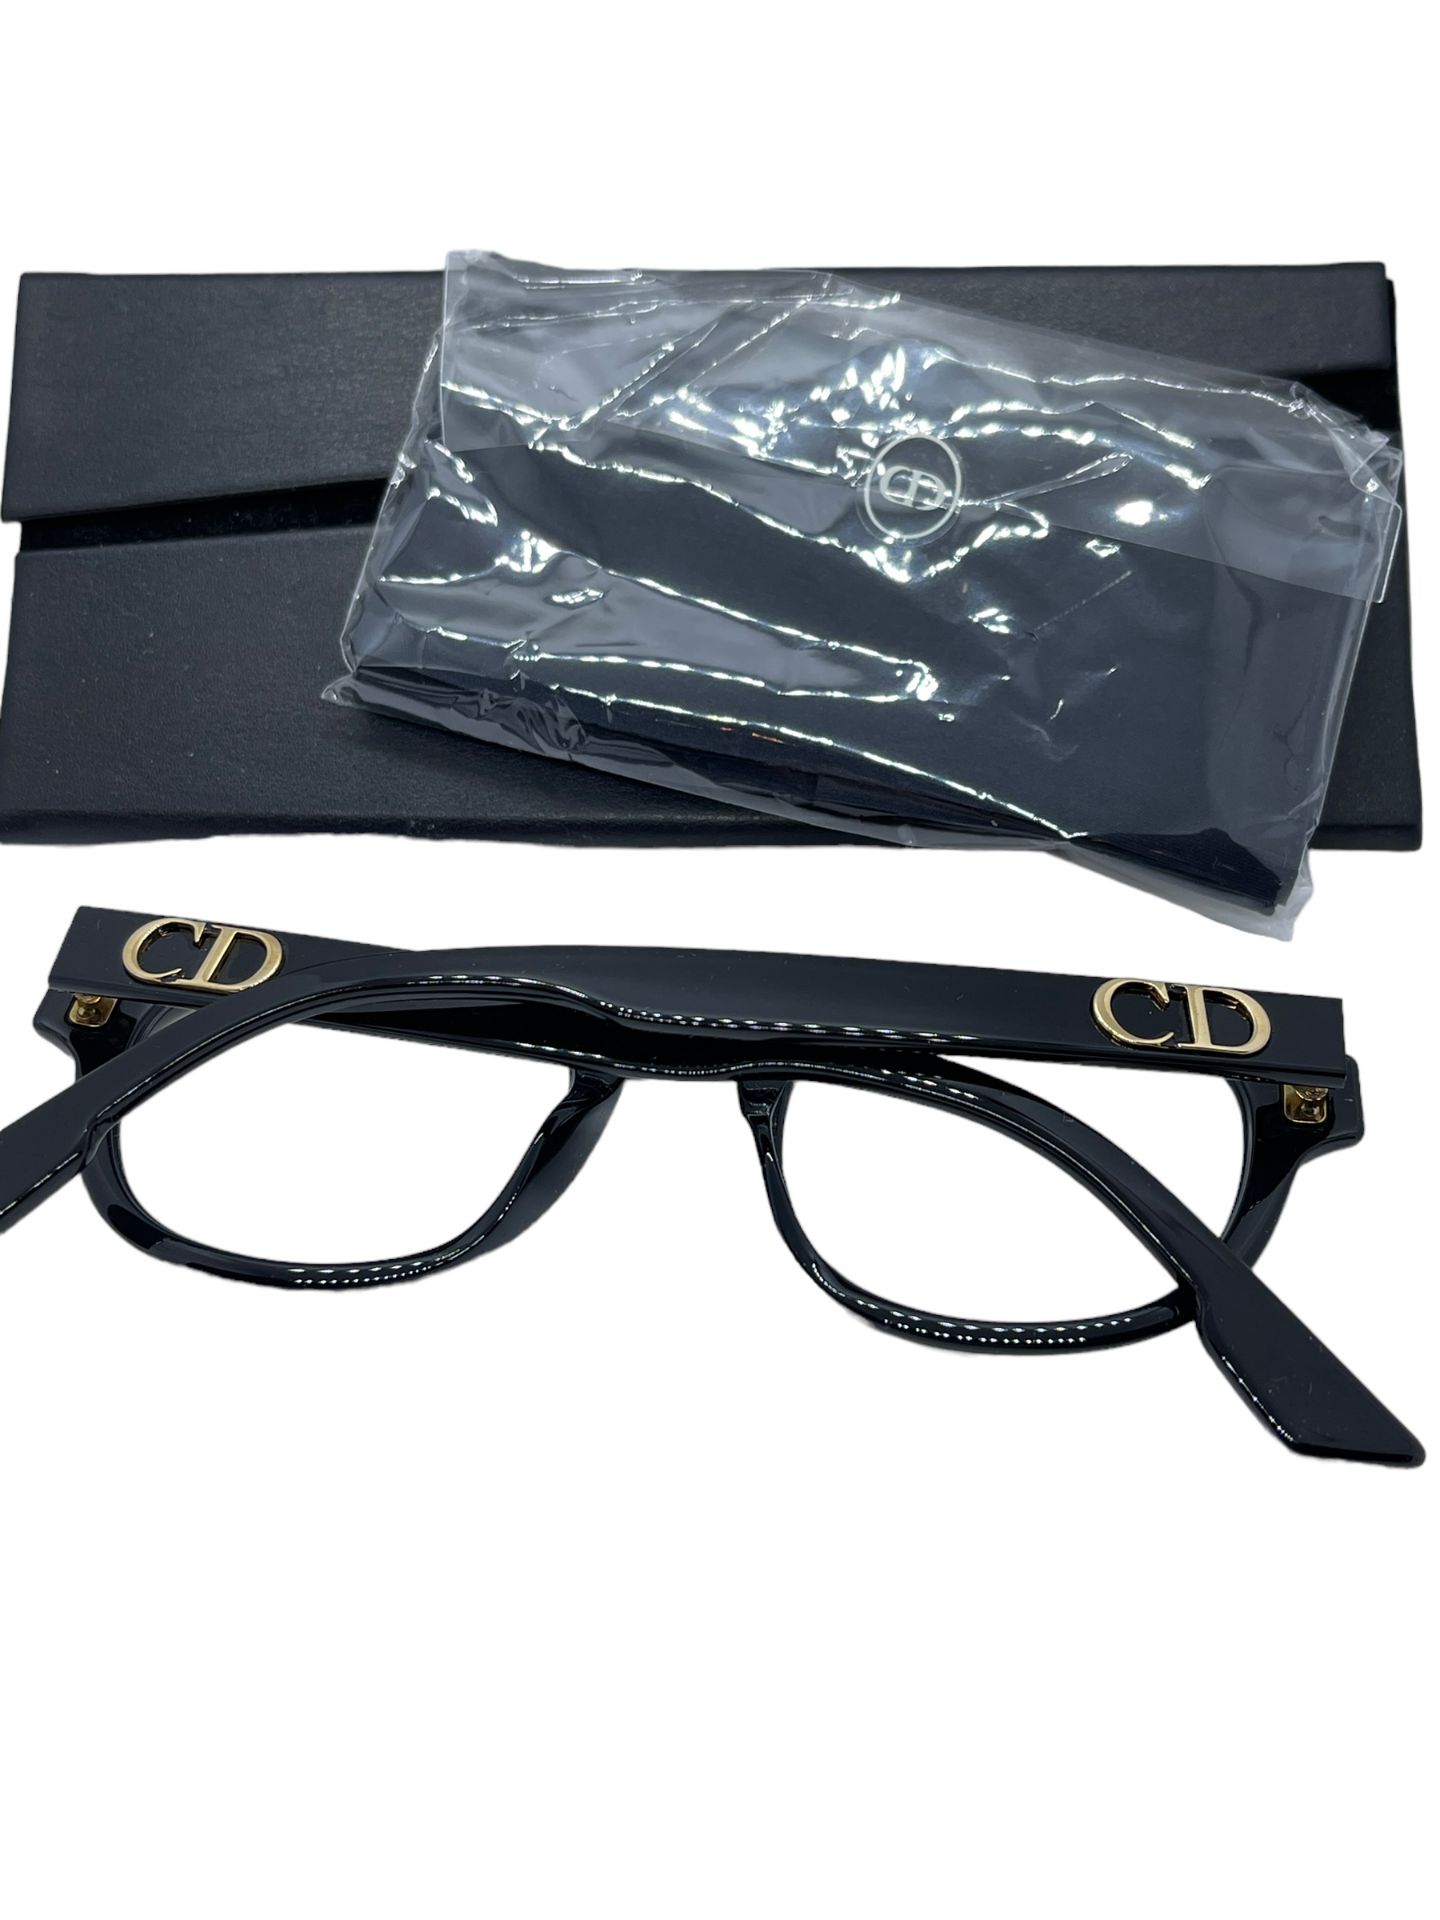 Marc Jacob's new spectacles mens. - Image 9 of 9